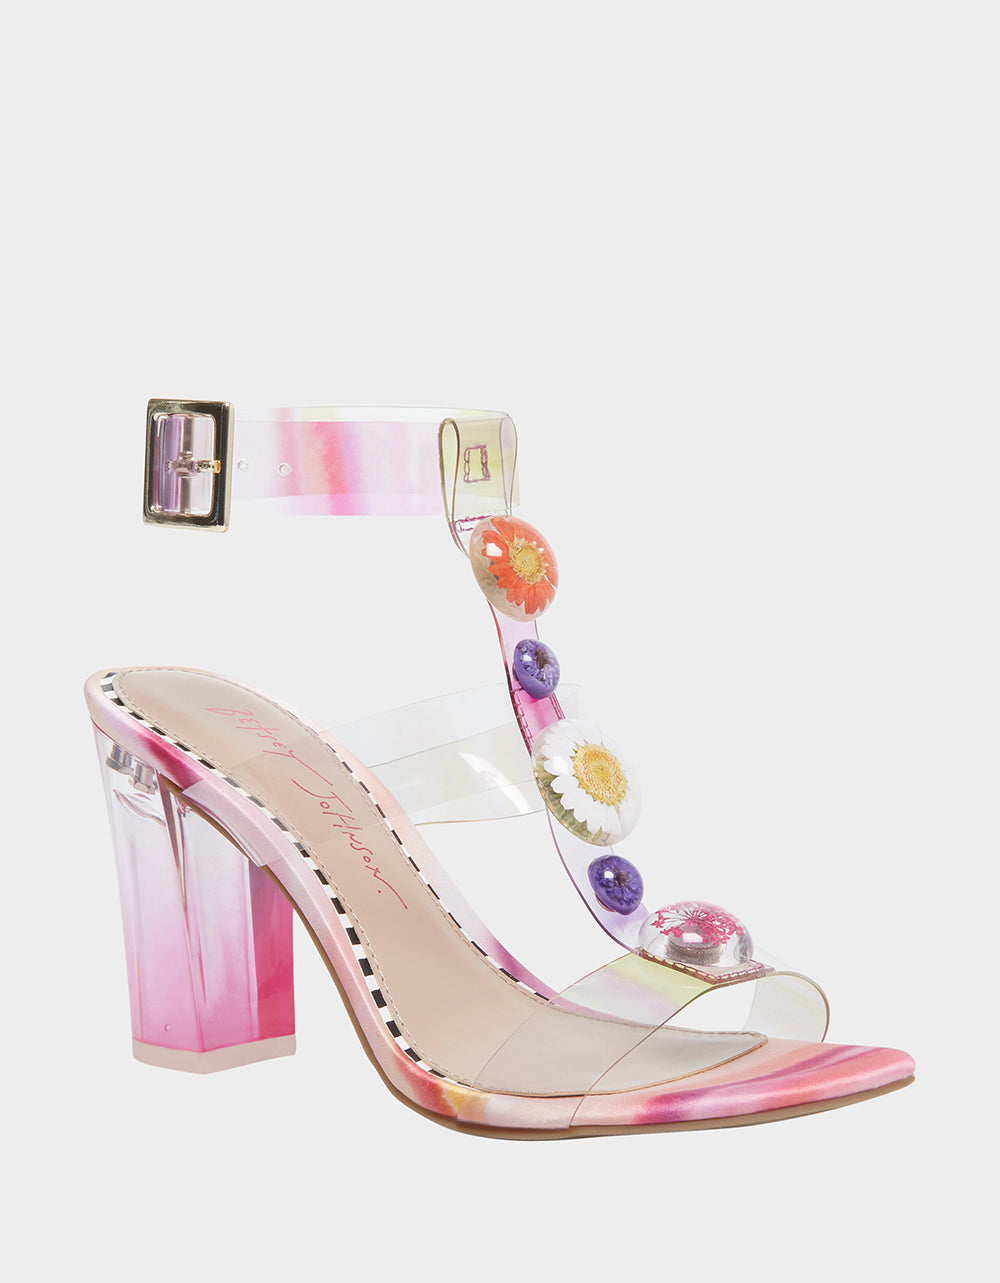 betsey johnson pink shoes